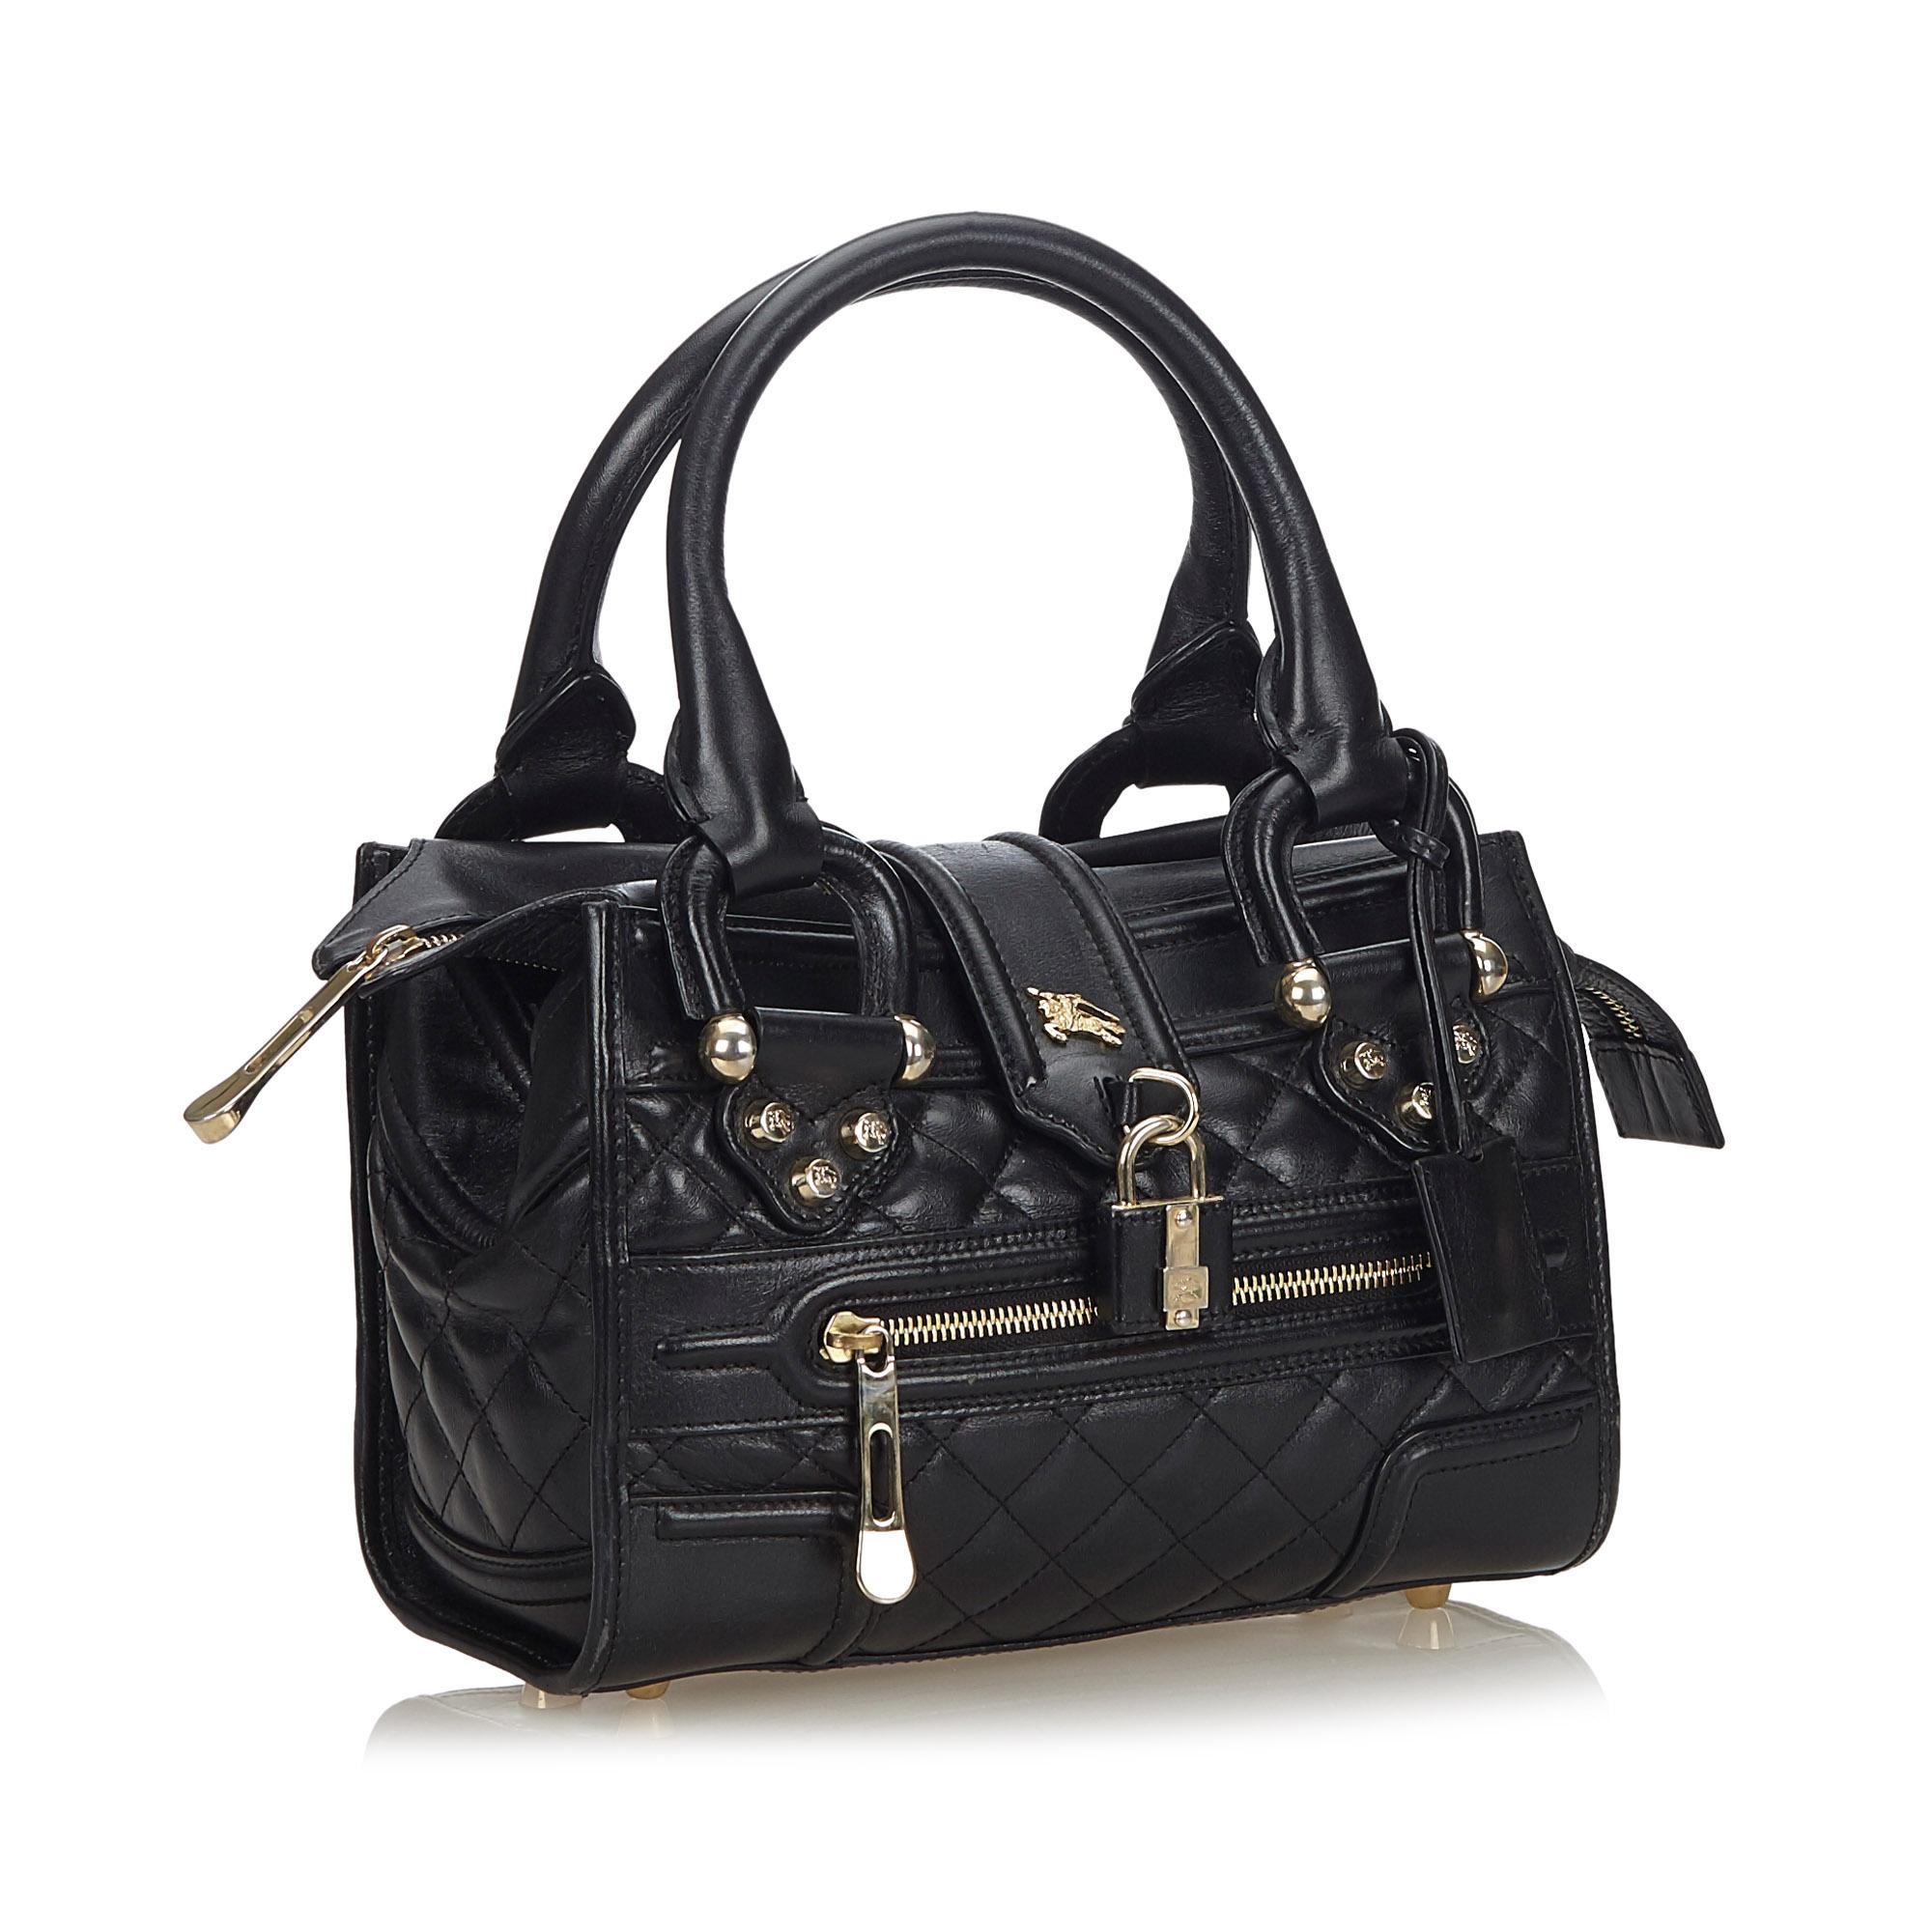 This handbag bag features a quilted leather body, a front exterior zip pocket, rolled leather handles, a front strap with a padlock closure, a top zip closure, and an interior zip pocket. It carries as B+ condition rating.

Inclusions: 
This item